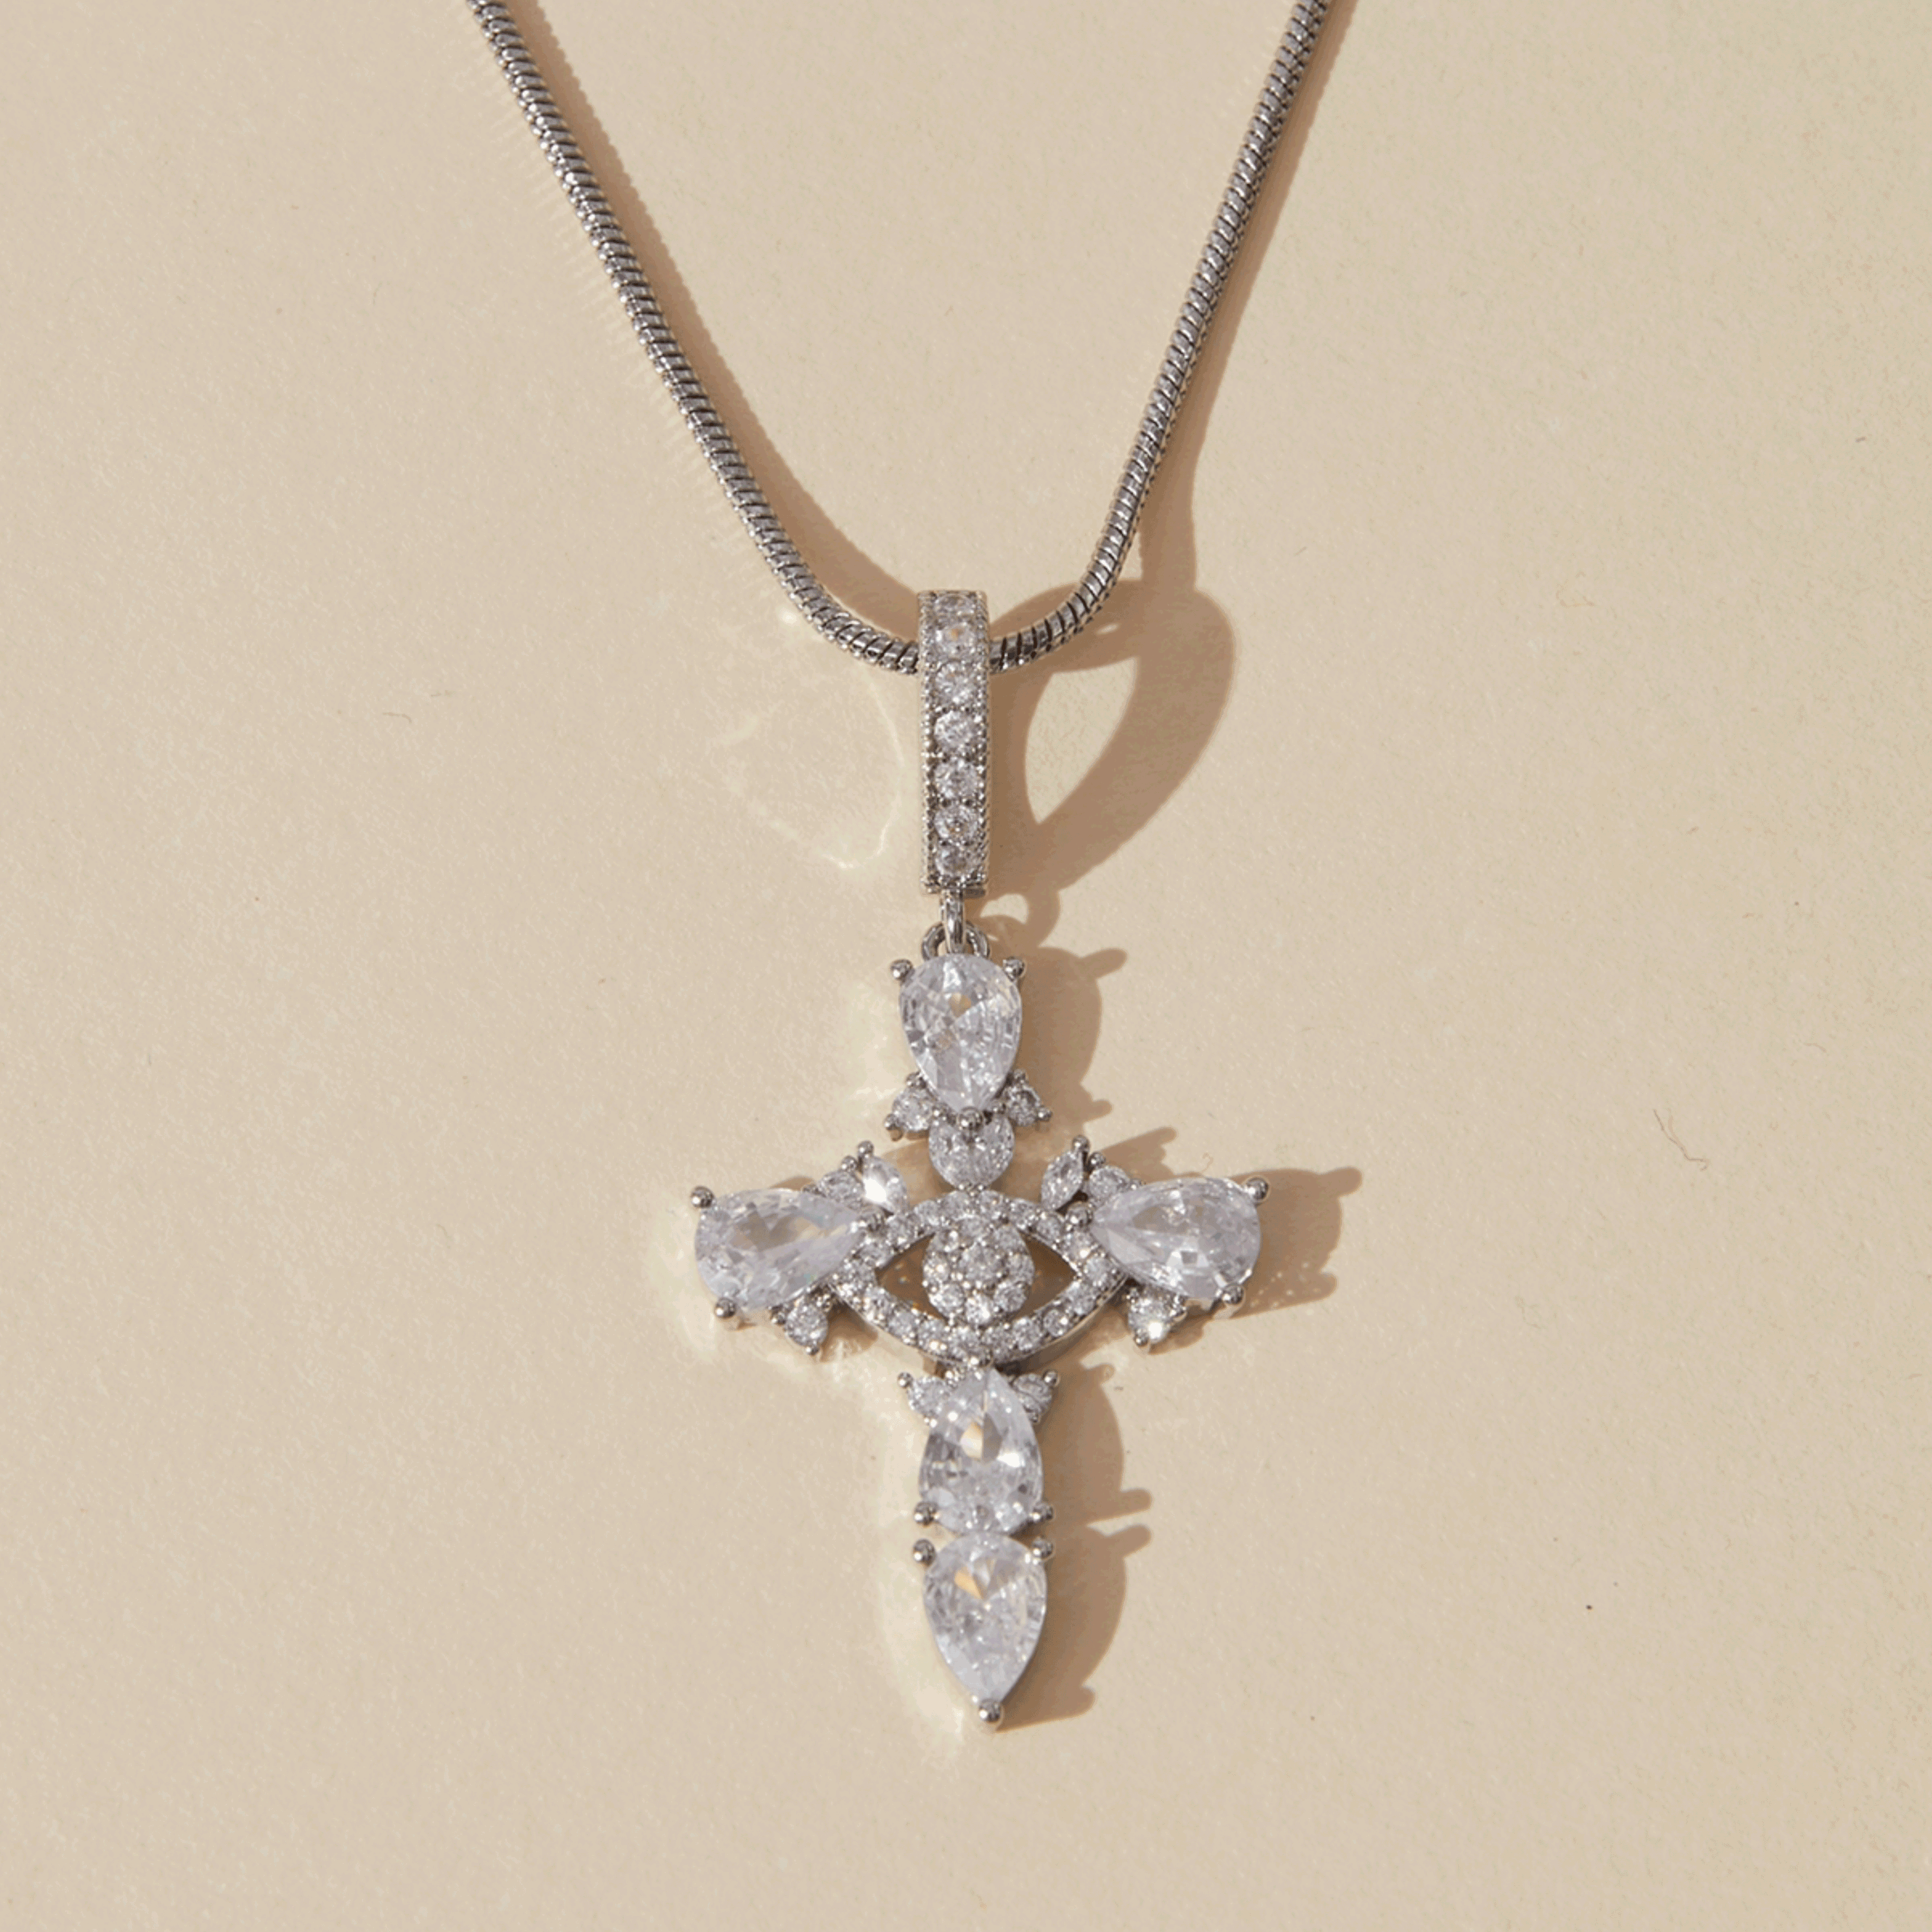 Bling Cross Necklace in gold and silver